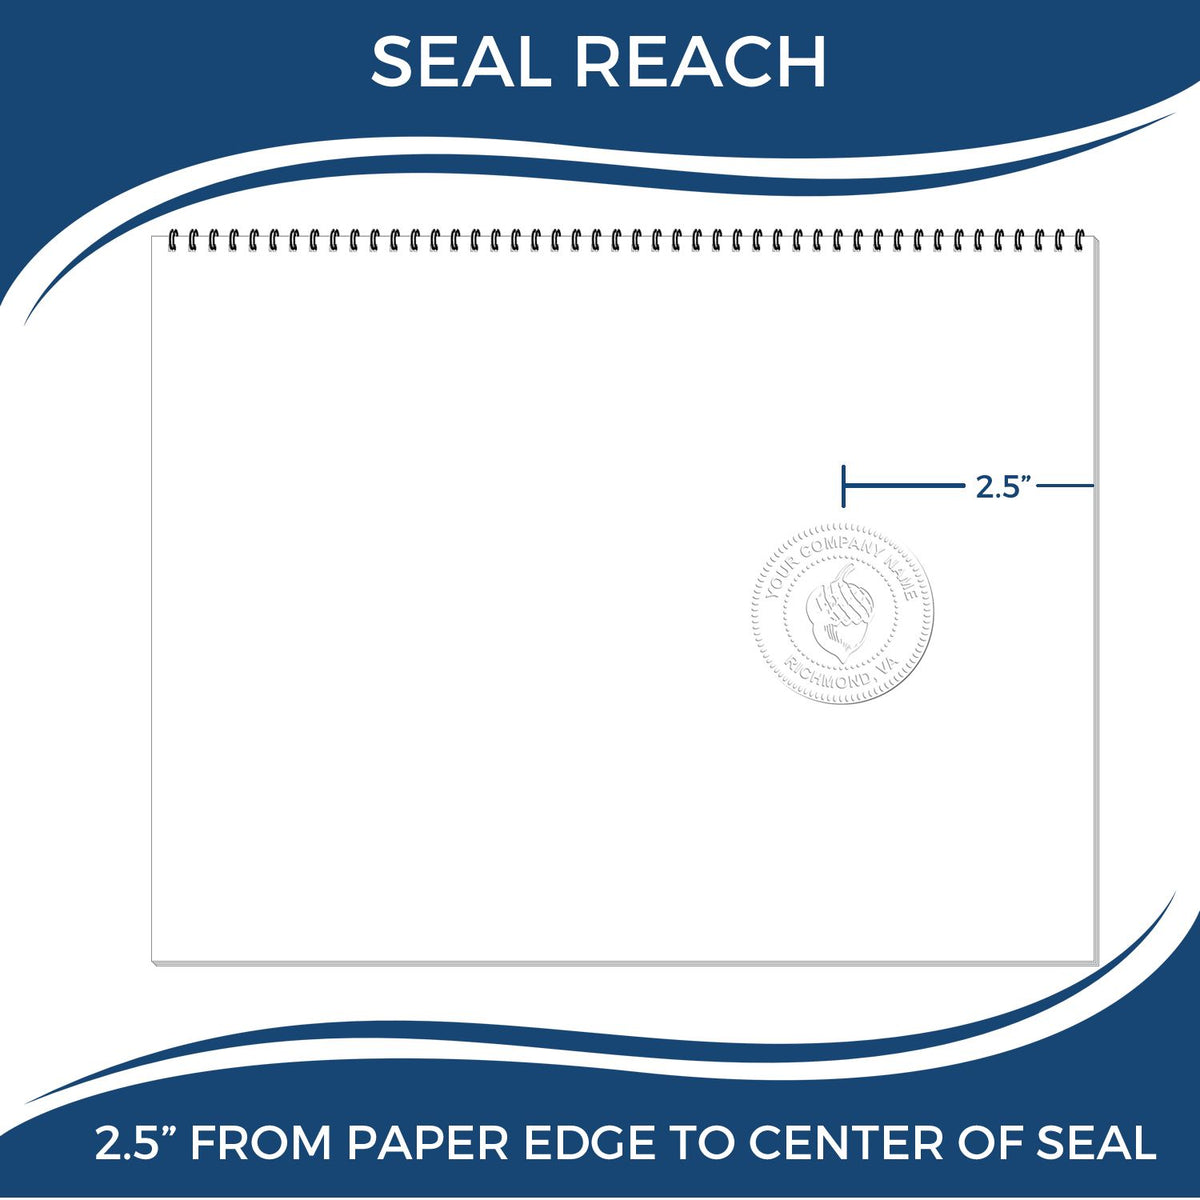 An infographic showing the seal reach which is represented by a ruler and a miniature seal image of the Long Reach Connecticut Geology Seal